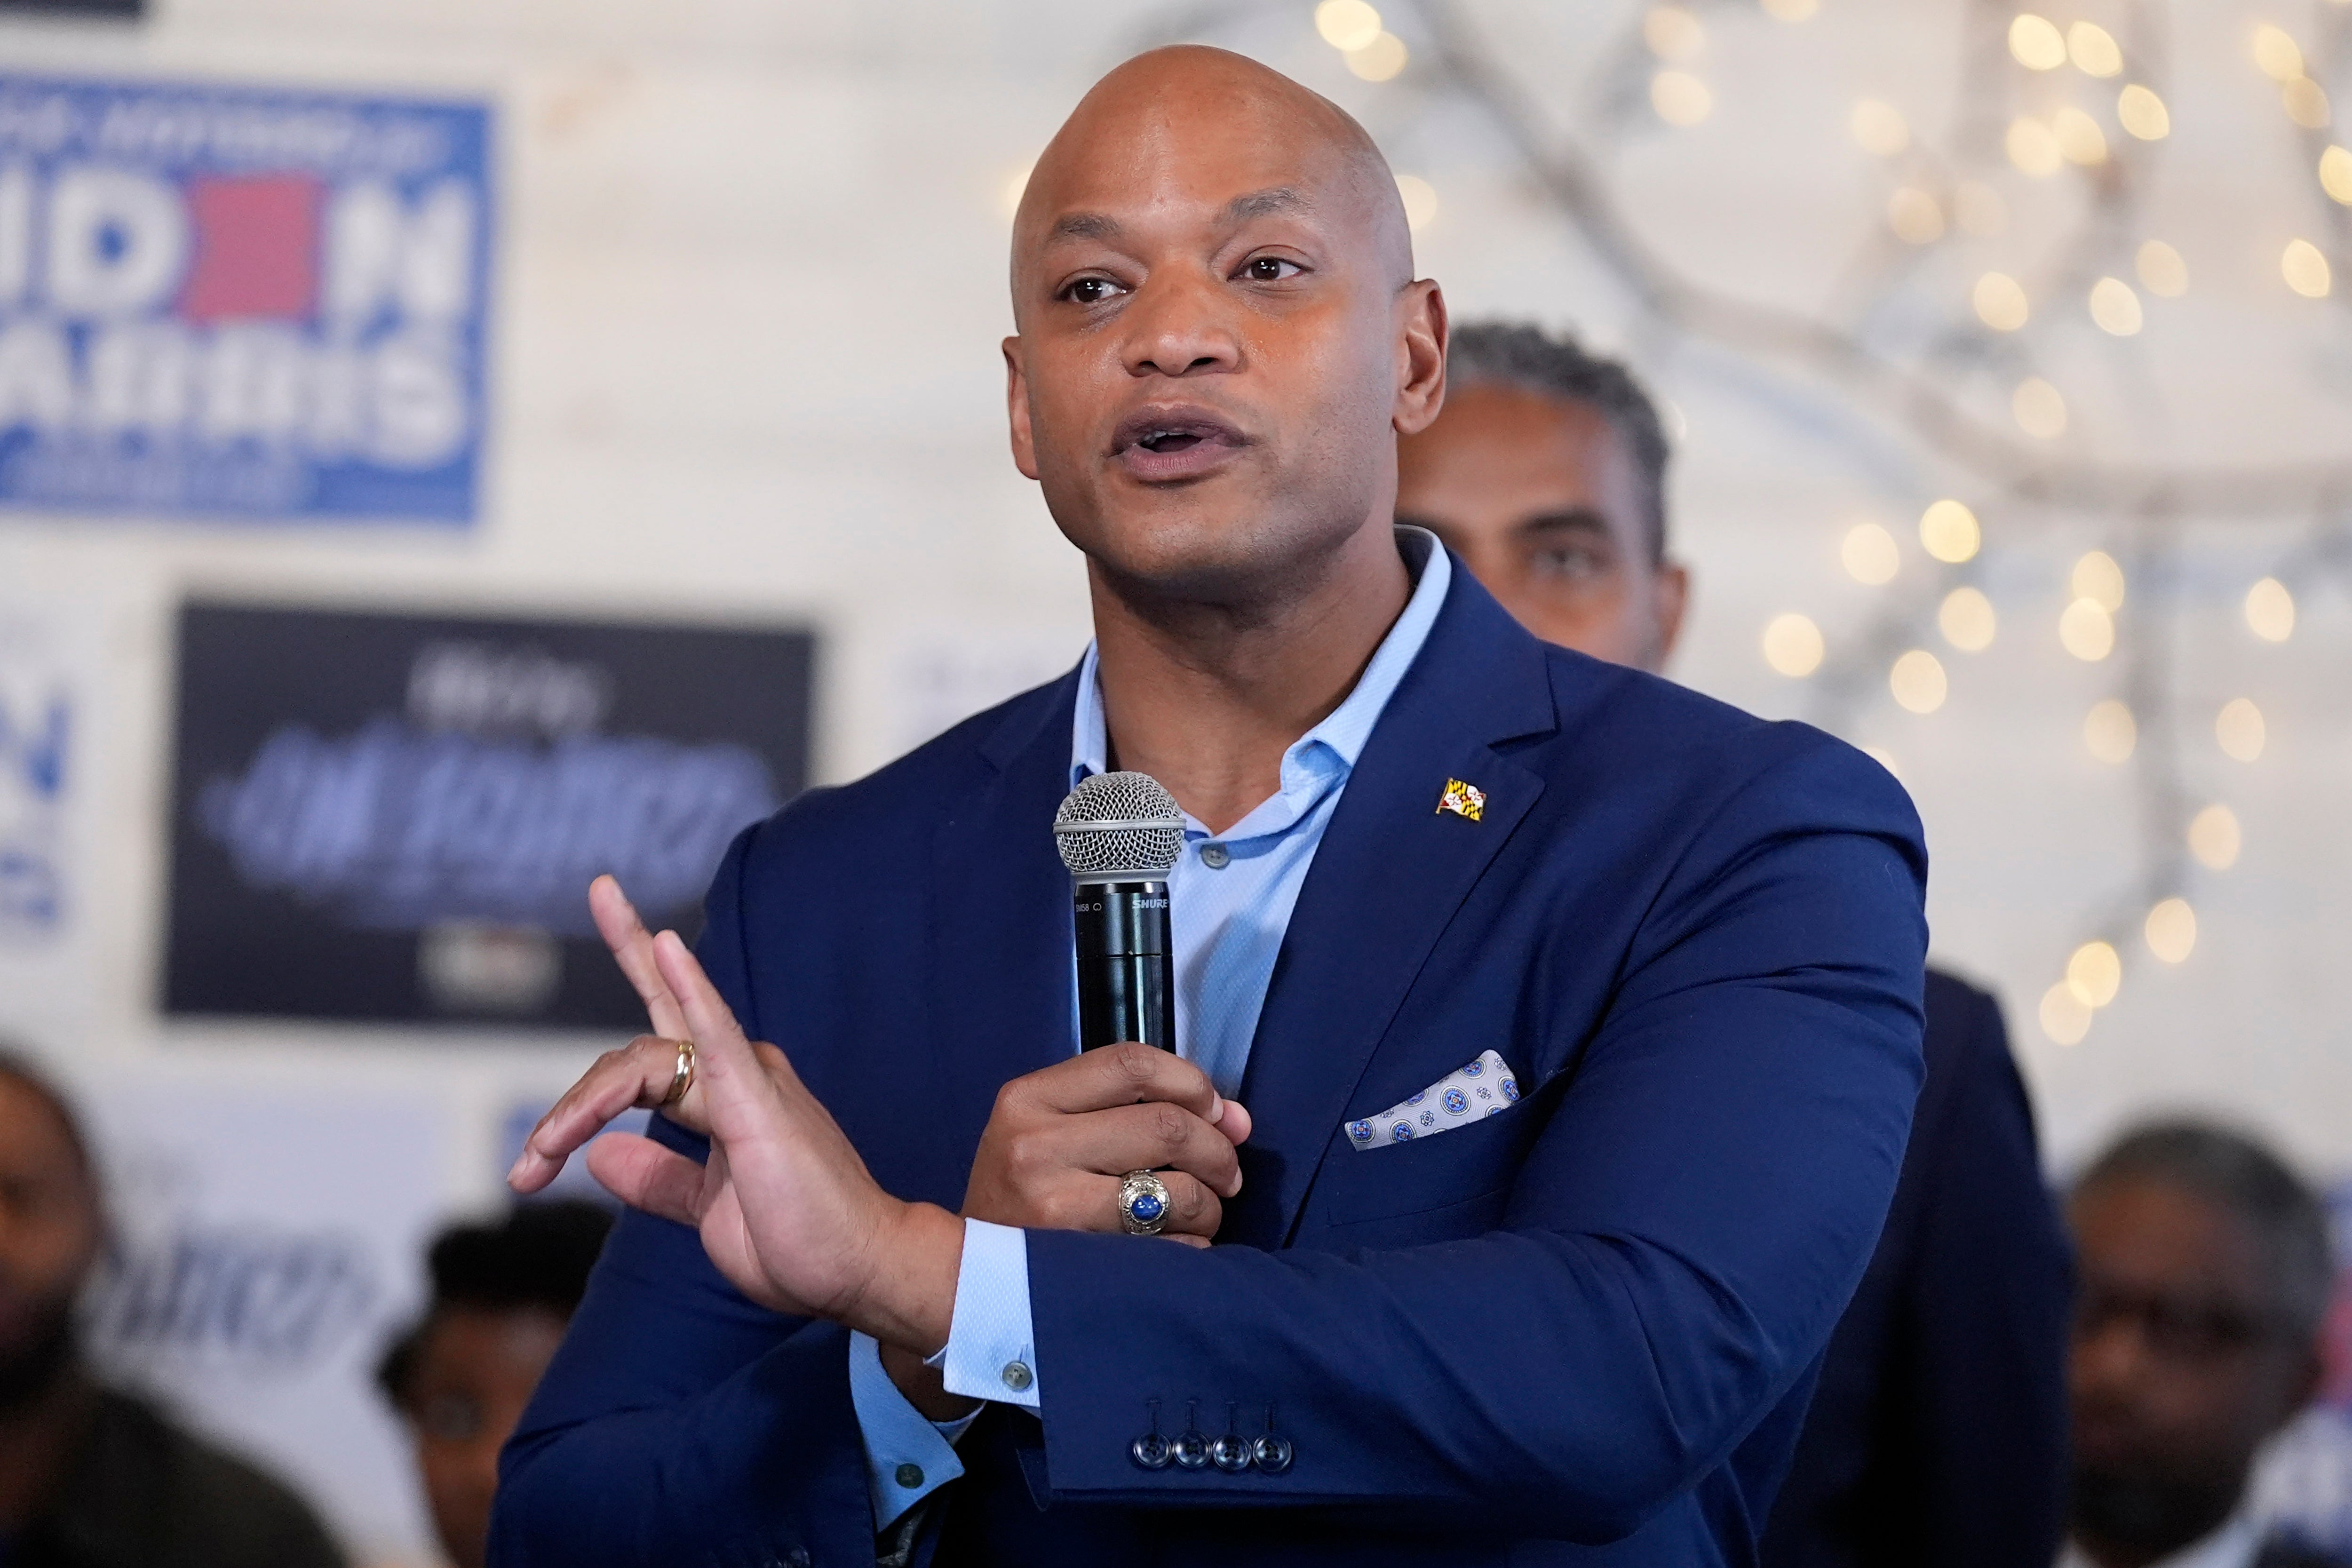 Wes Moore gained some national profile during his response to the collapse of the Francis Scott Key bridge in his home state of Maryland